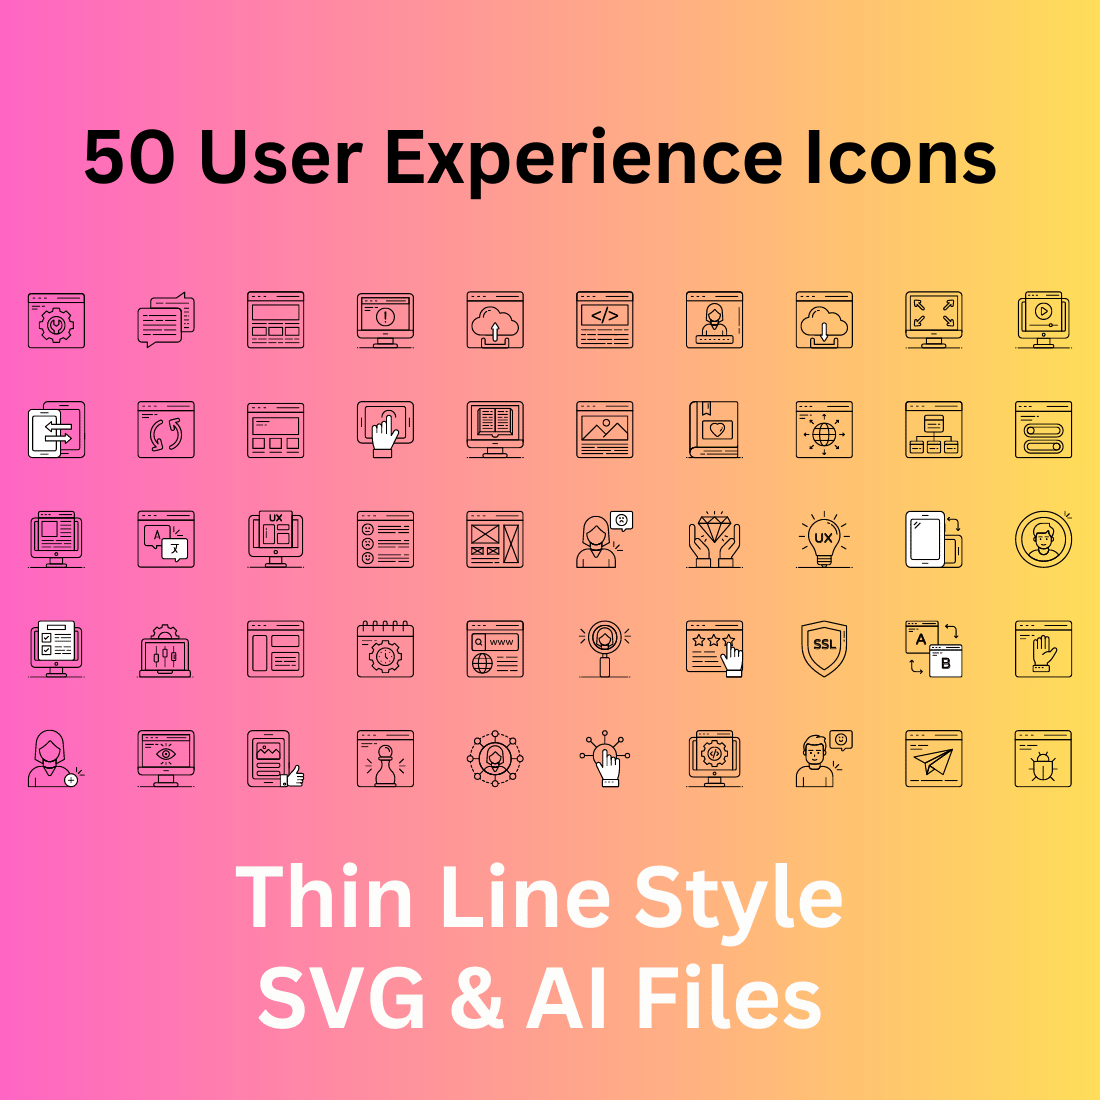 User Experience Icon Set 50 Outline Icons - SVG And AI Files cover image.